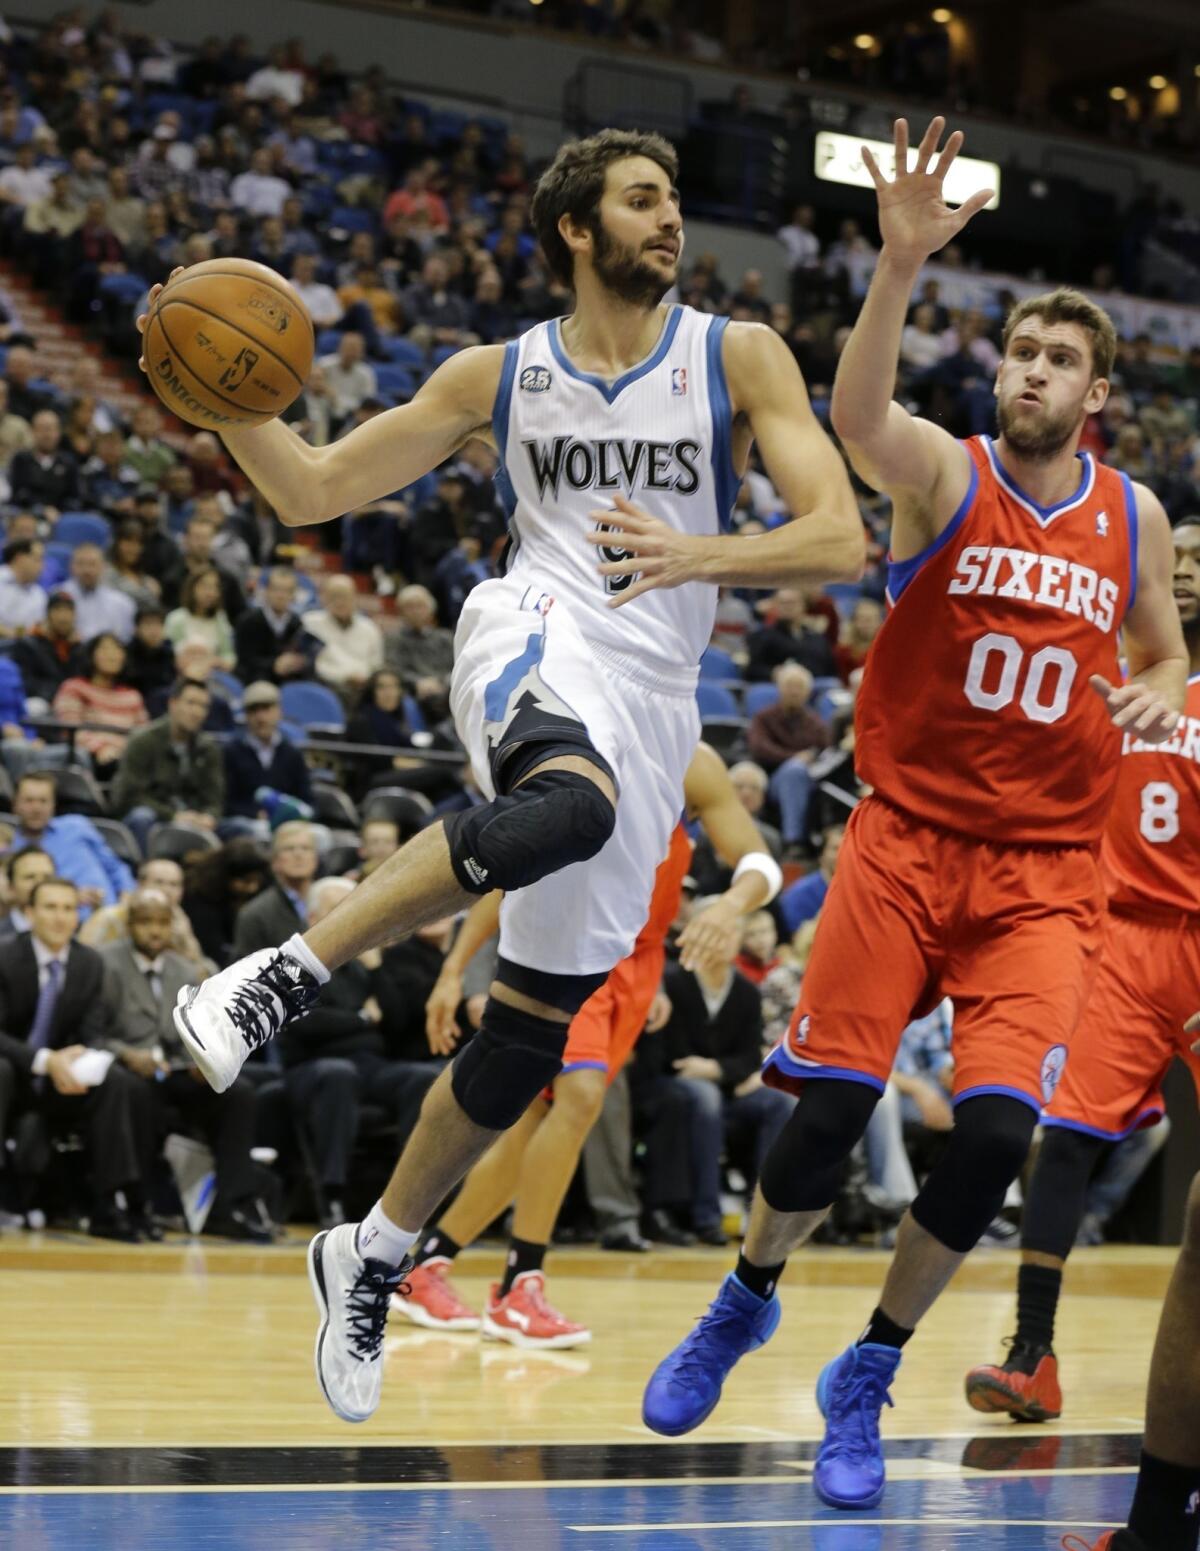 Minnesota Timberwolves guard Ricky Rubio caused problems for the Lakers when the teams met on Nov. 10.